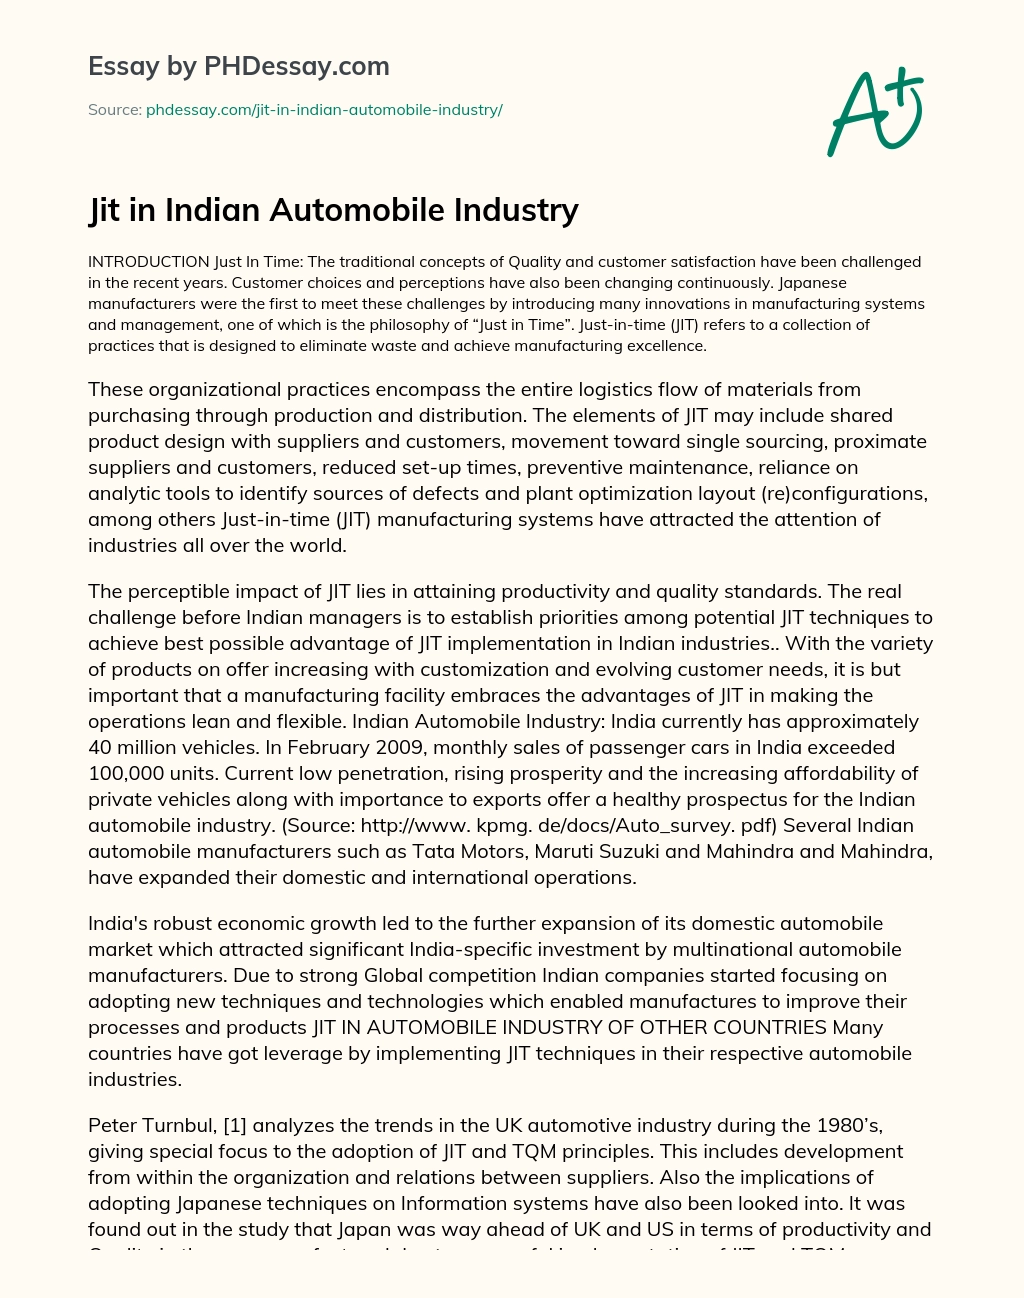 Jit in Indian Automobile Industry essay